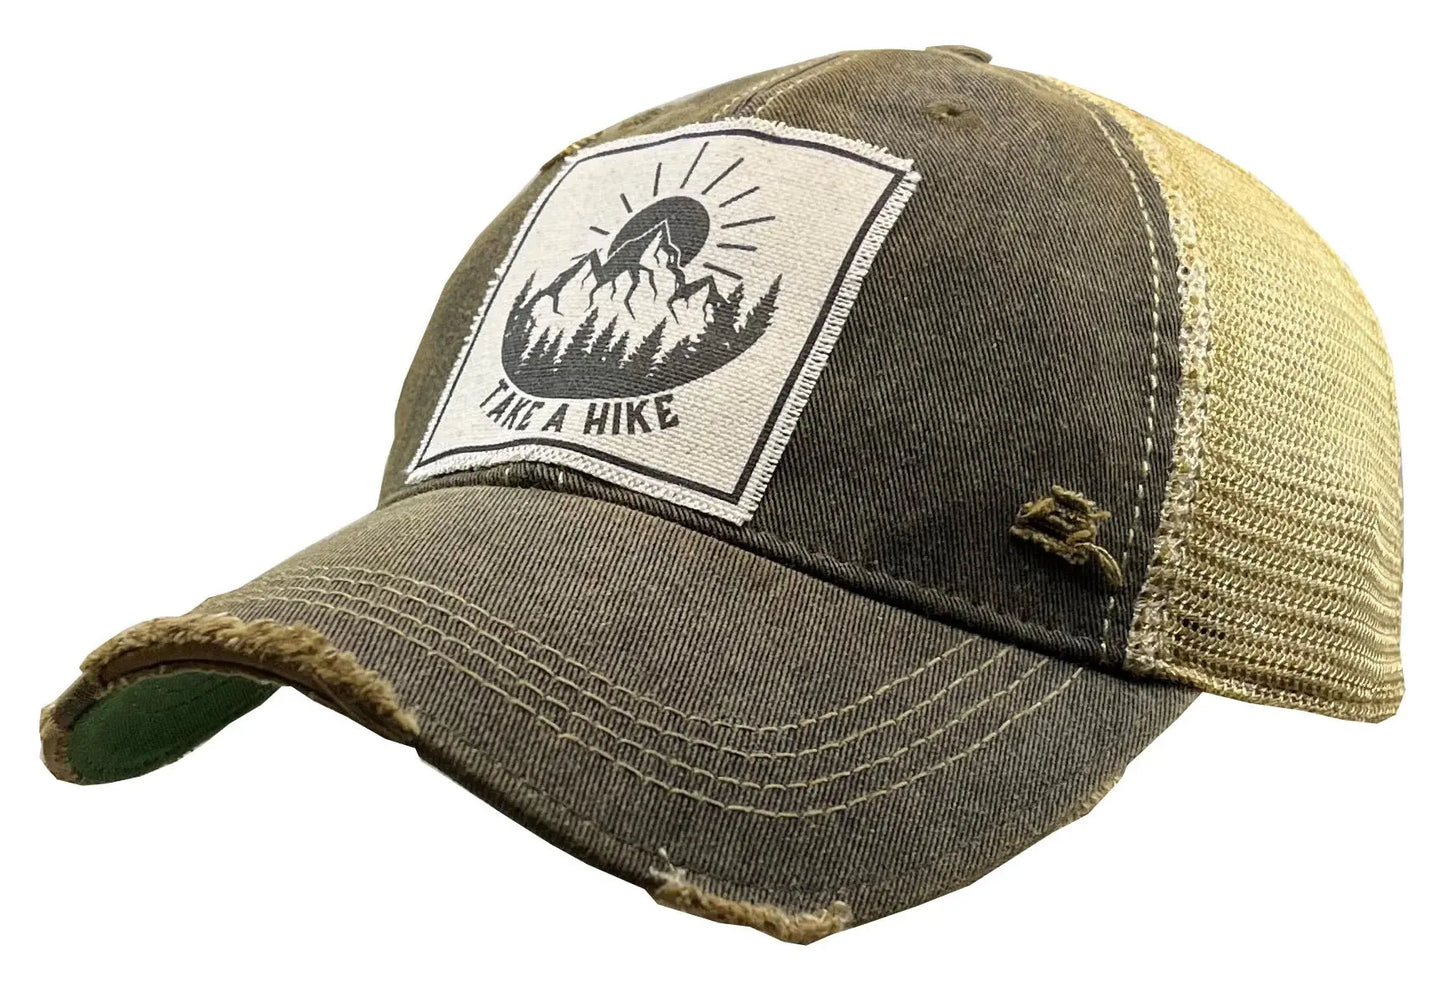 'TAKE A HIKE' distressed trucker ball cap - Bay-Tique